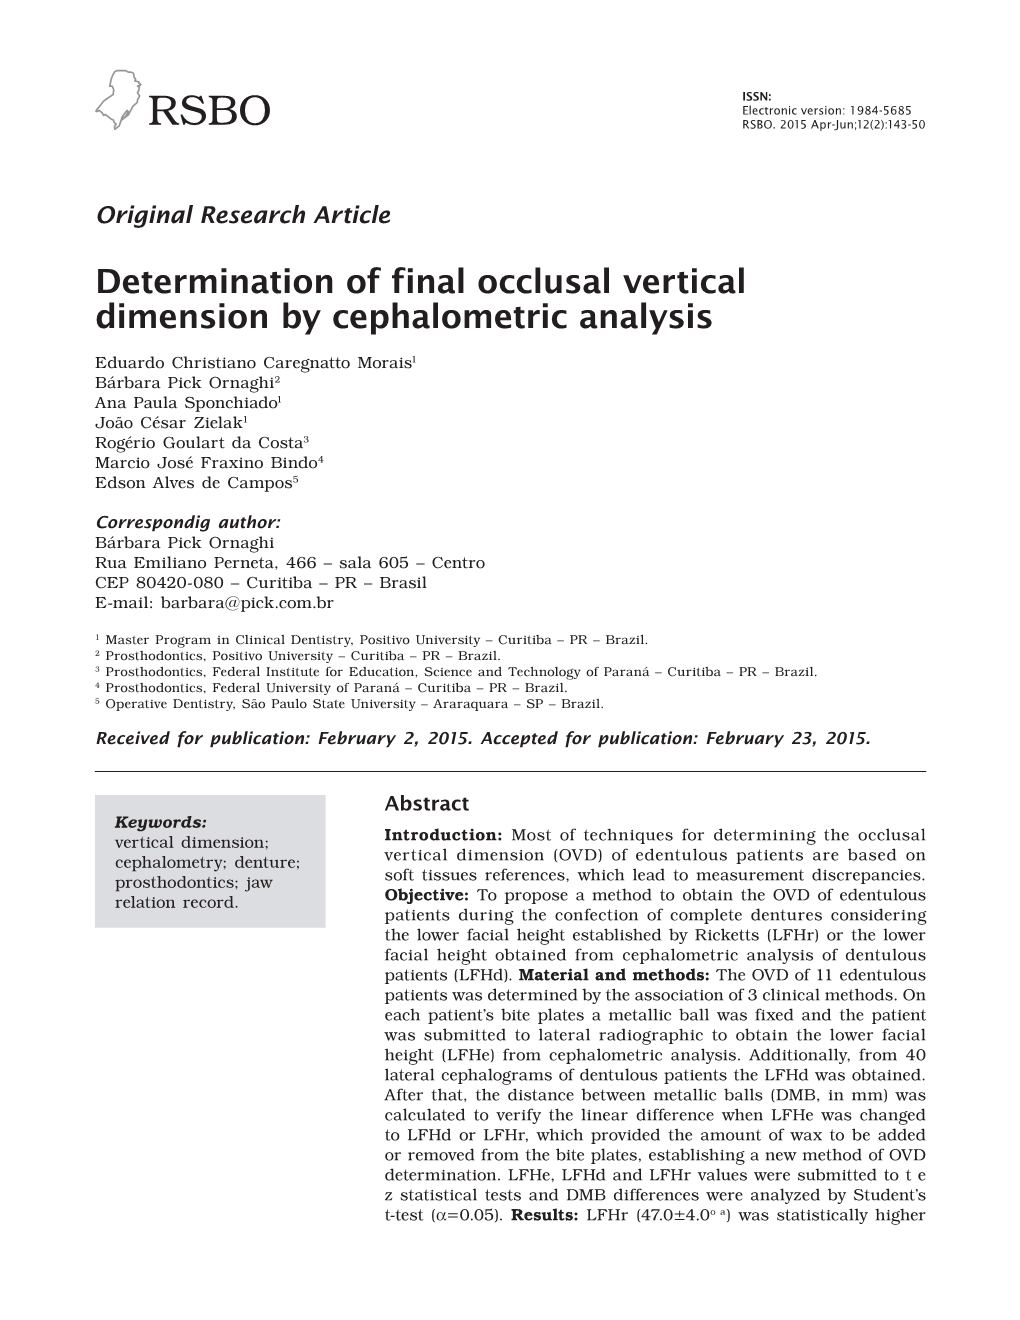 Determination of Final Occlusal Vertical Dimension by Cephalometric Analysis